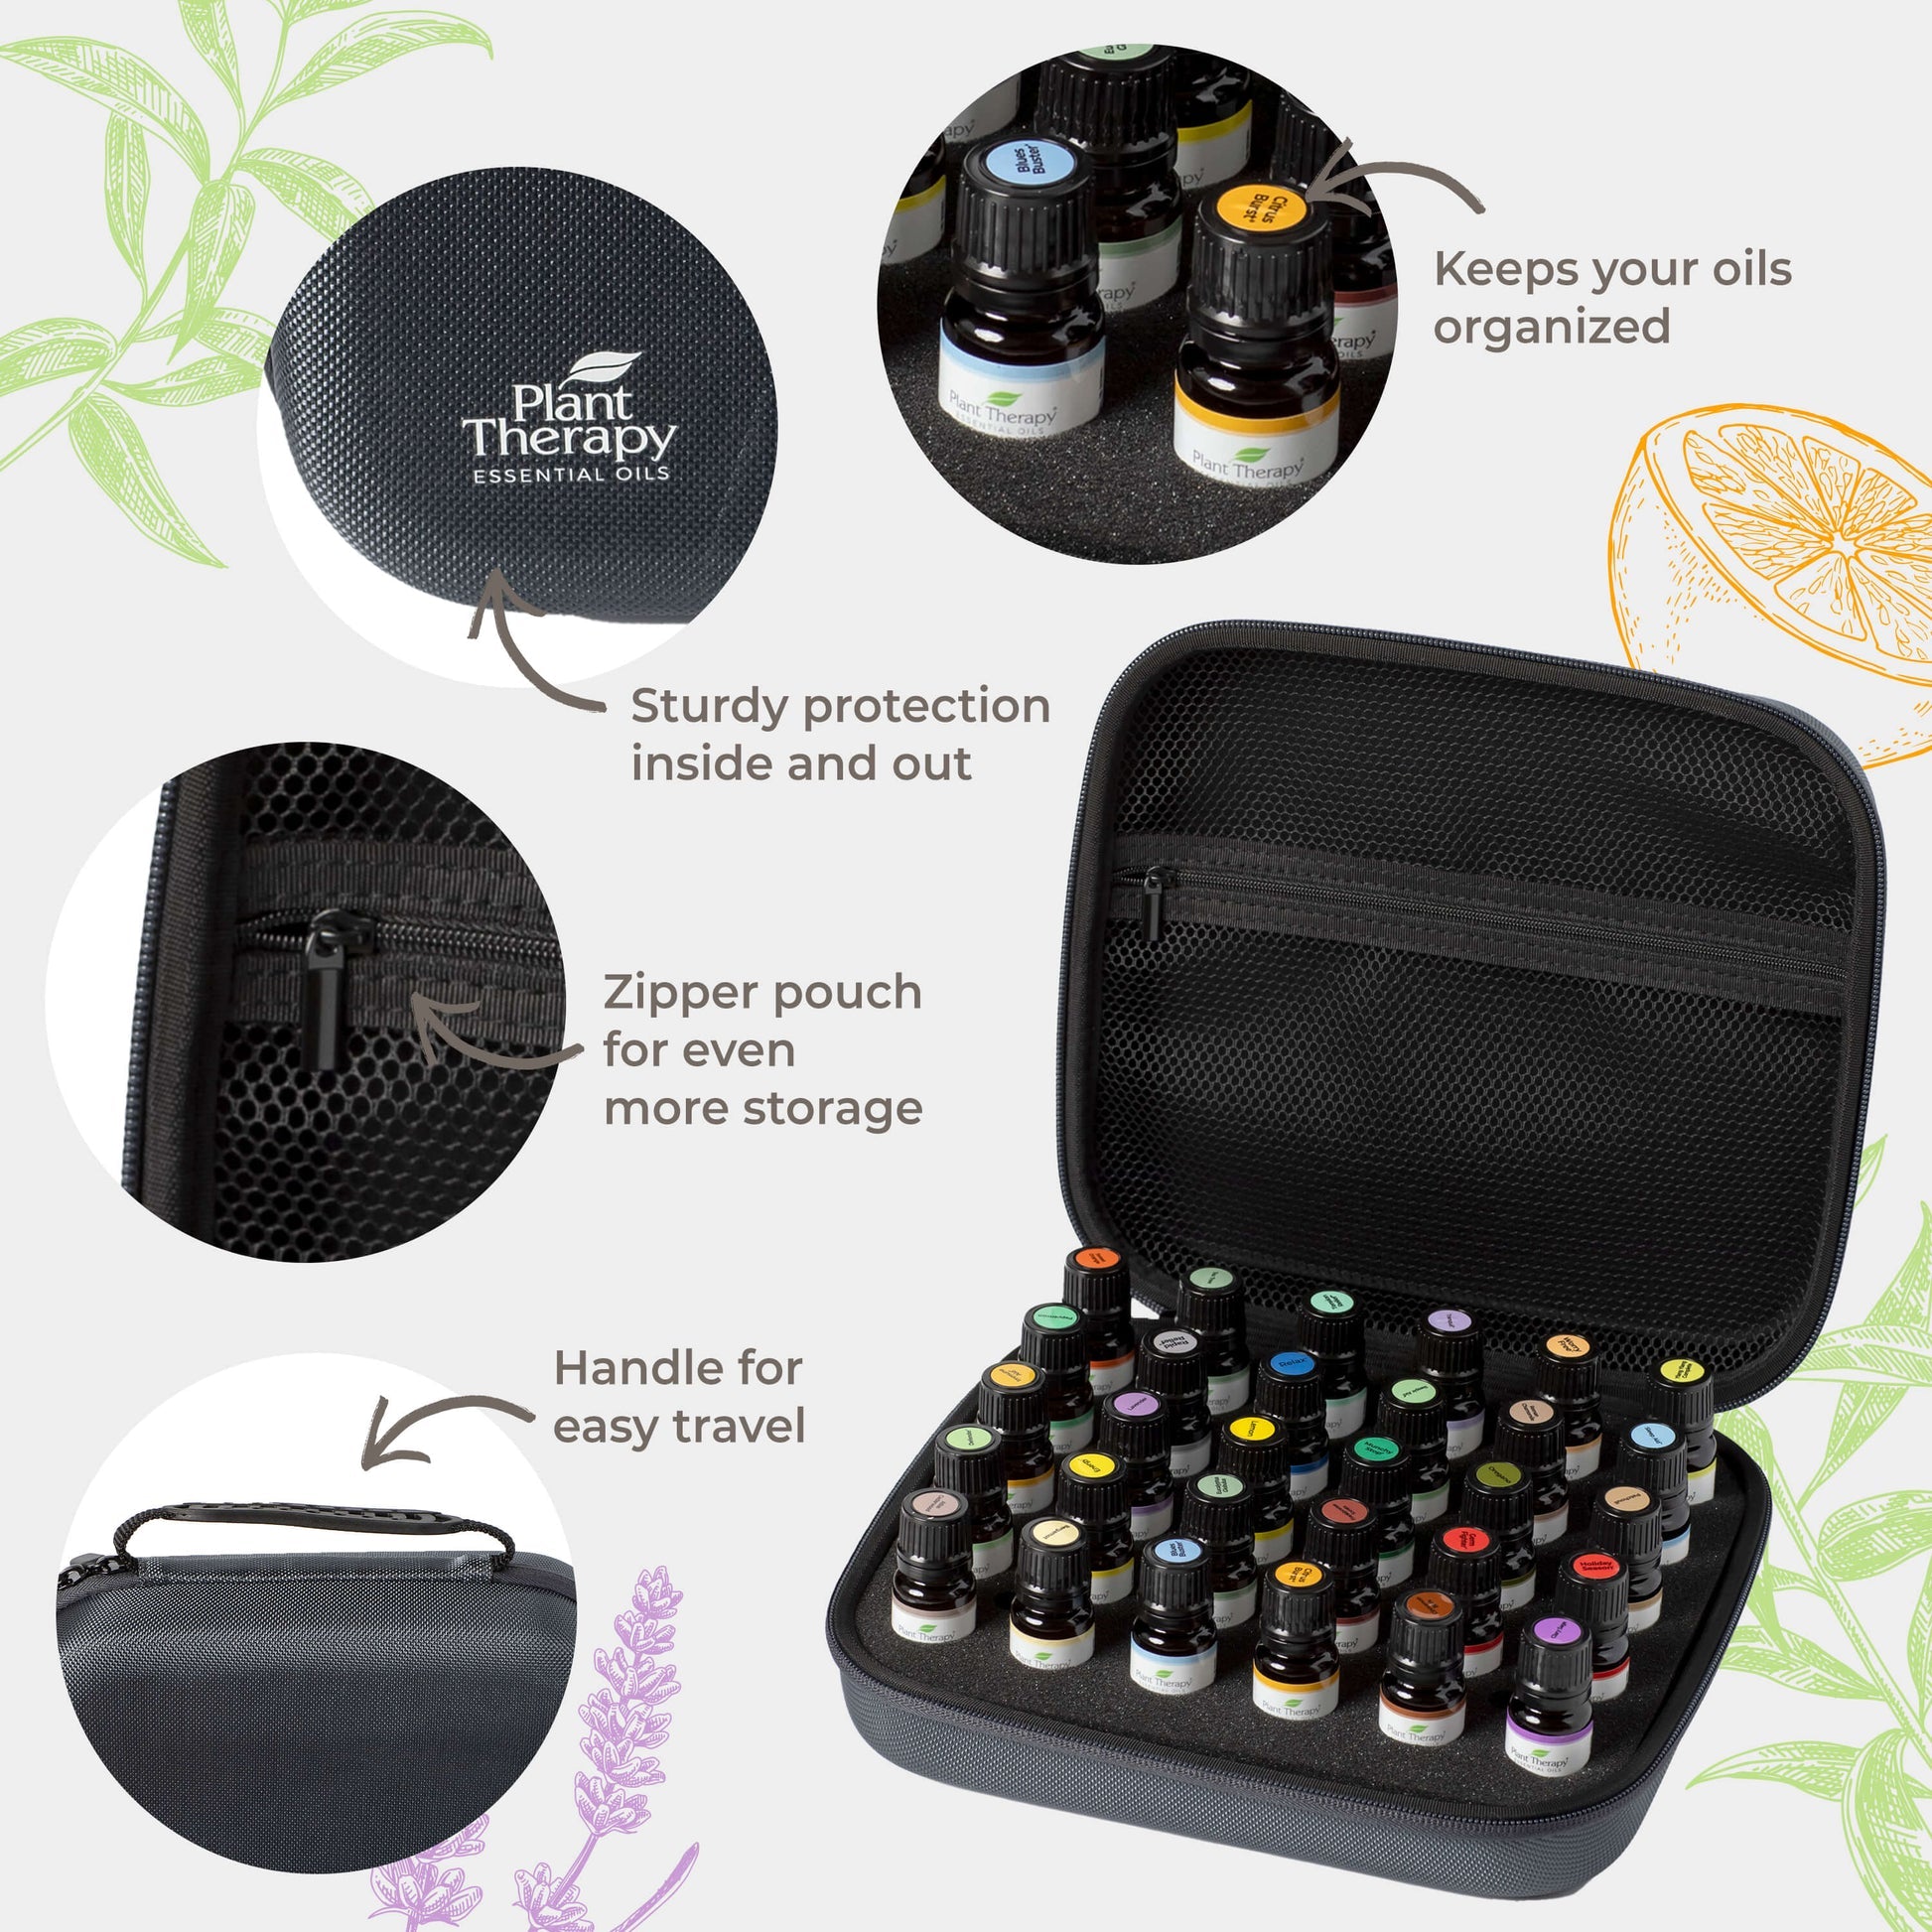  15 & 15 Essential Oil Set with Carrying Case Plant Therapy Perfumarie